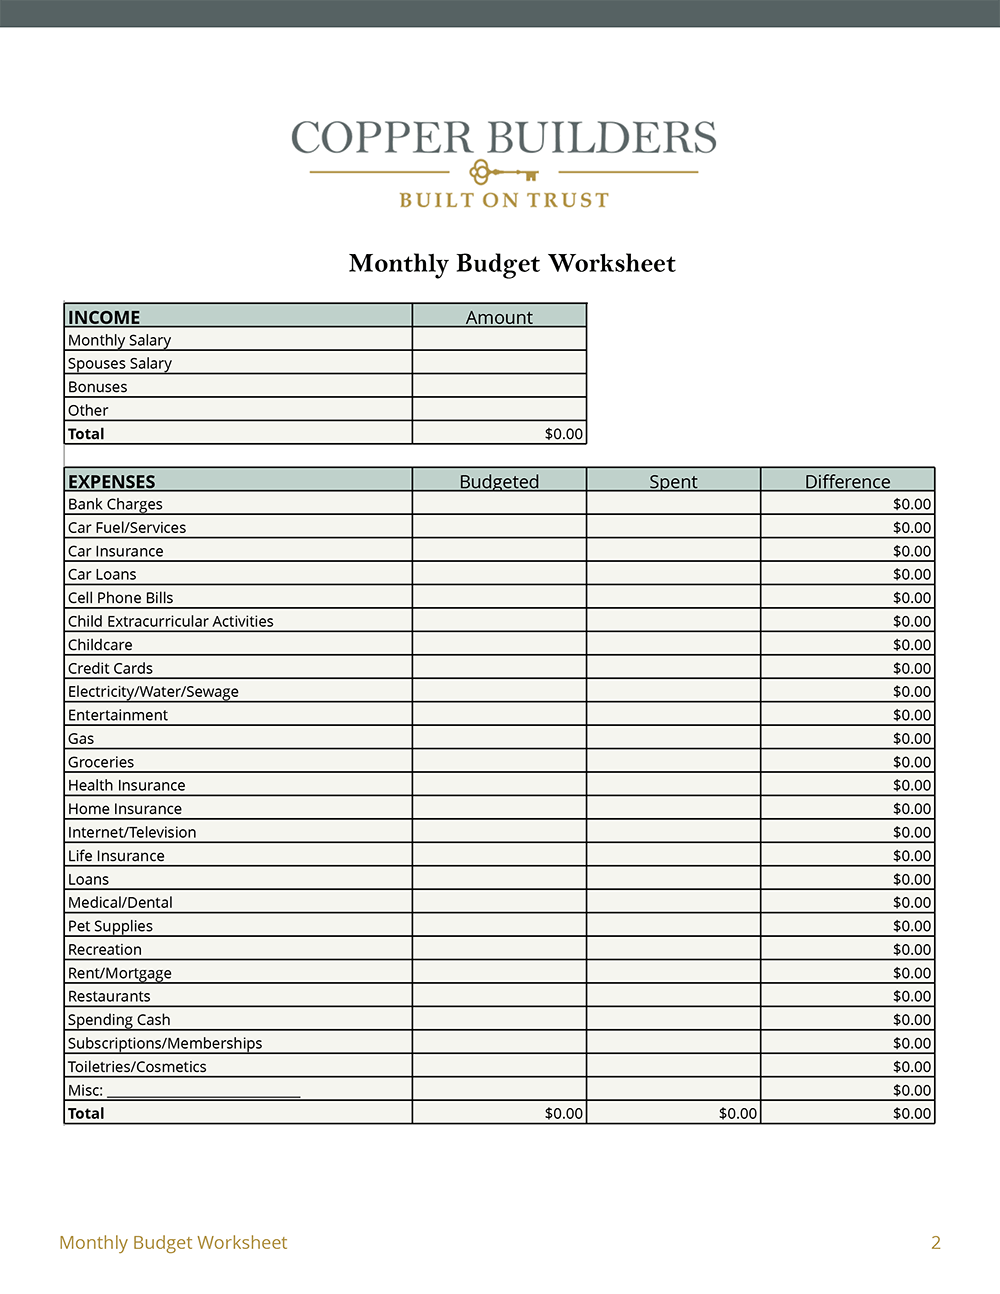 Download Your Monthly Budget Worksheet Today